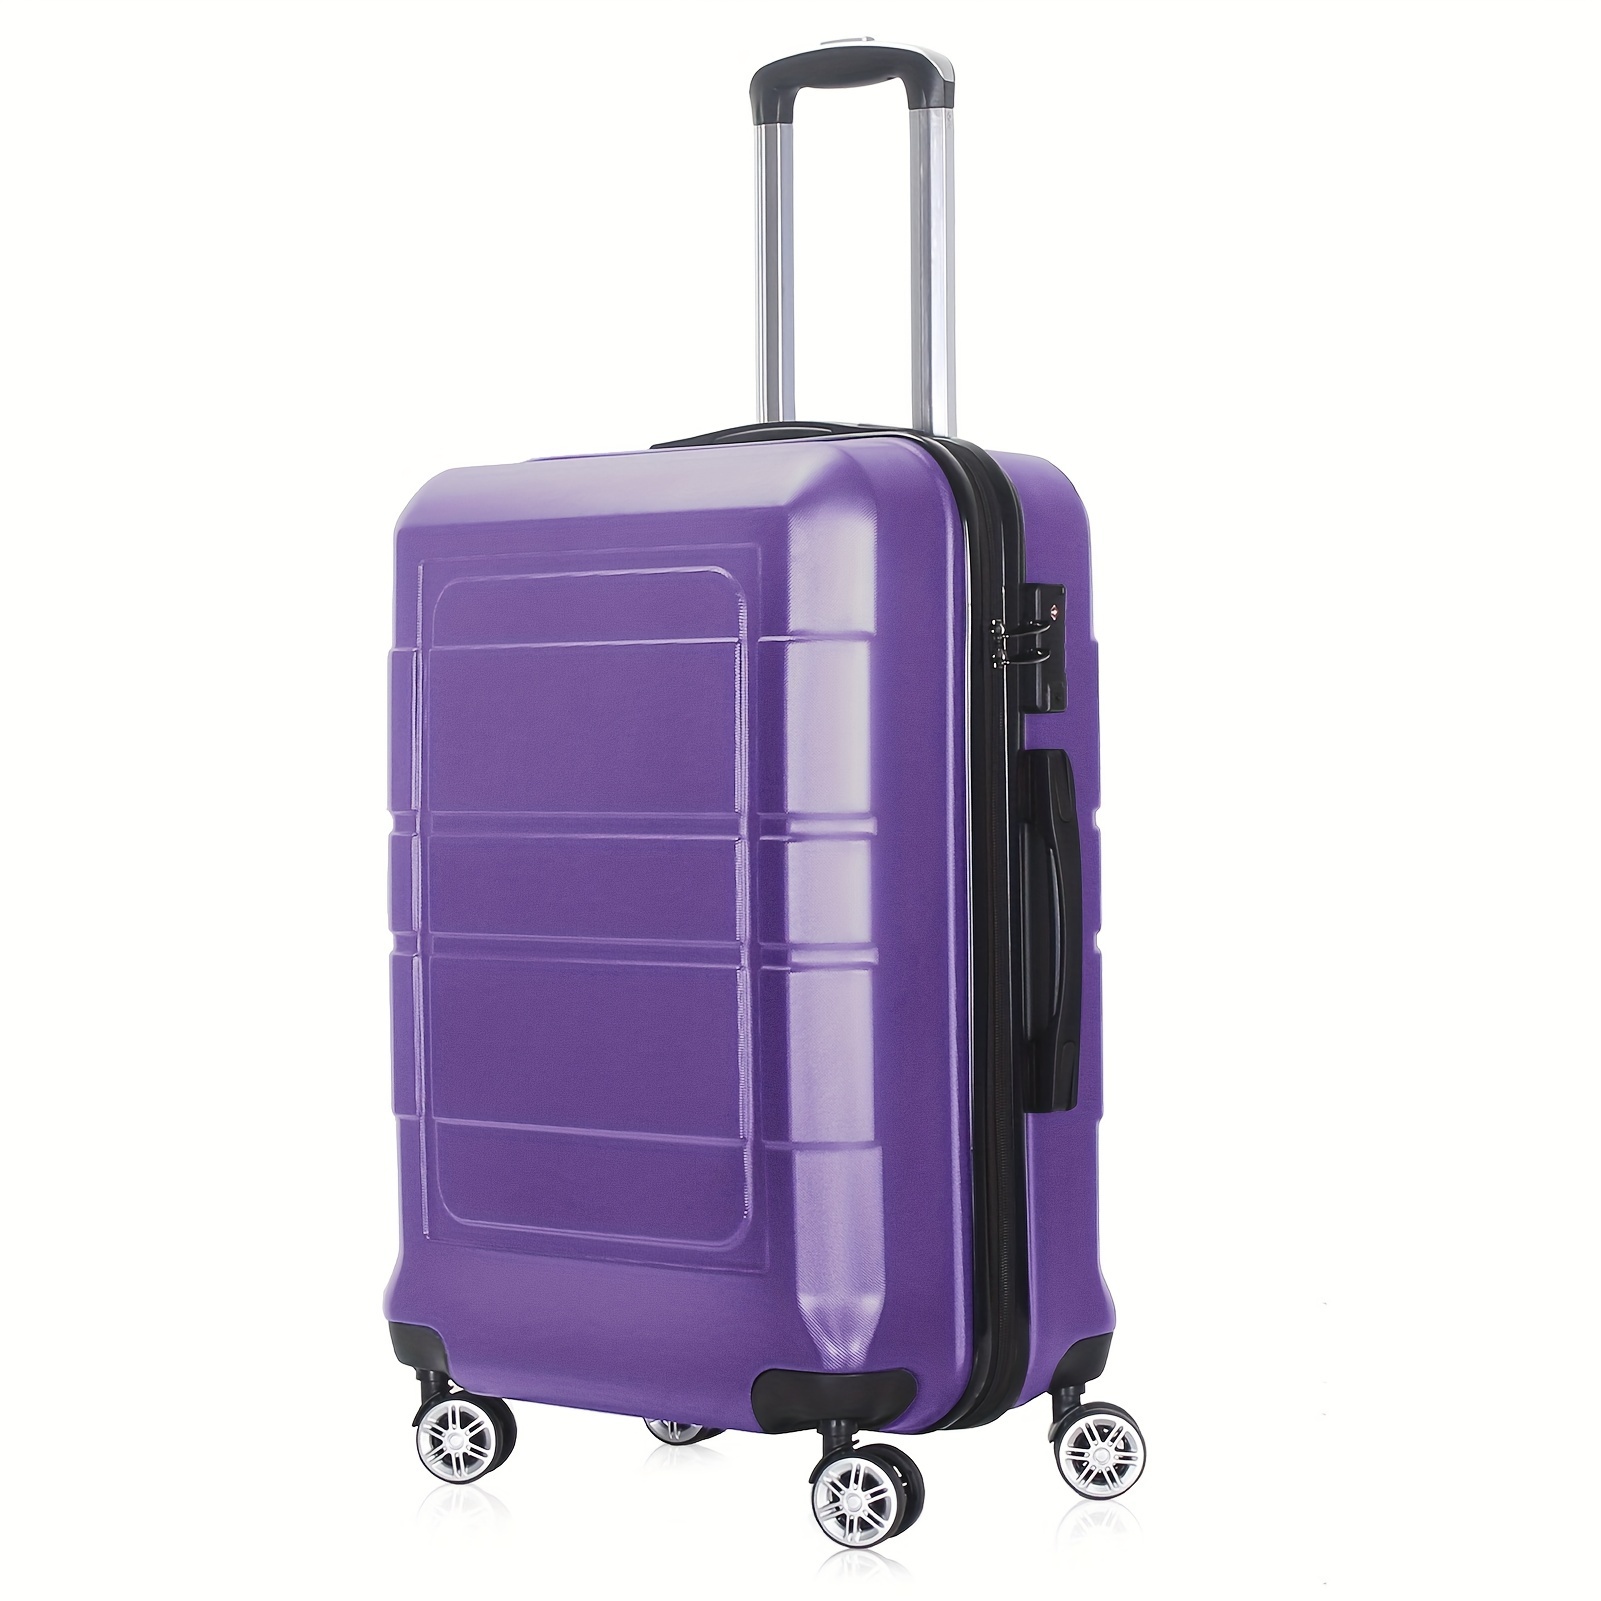 

Hardside Carry On Luggage, Spinner Wheels, Tsa Lock, 20-inch Durable Suitcase